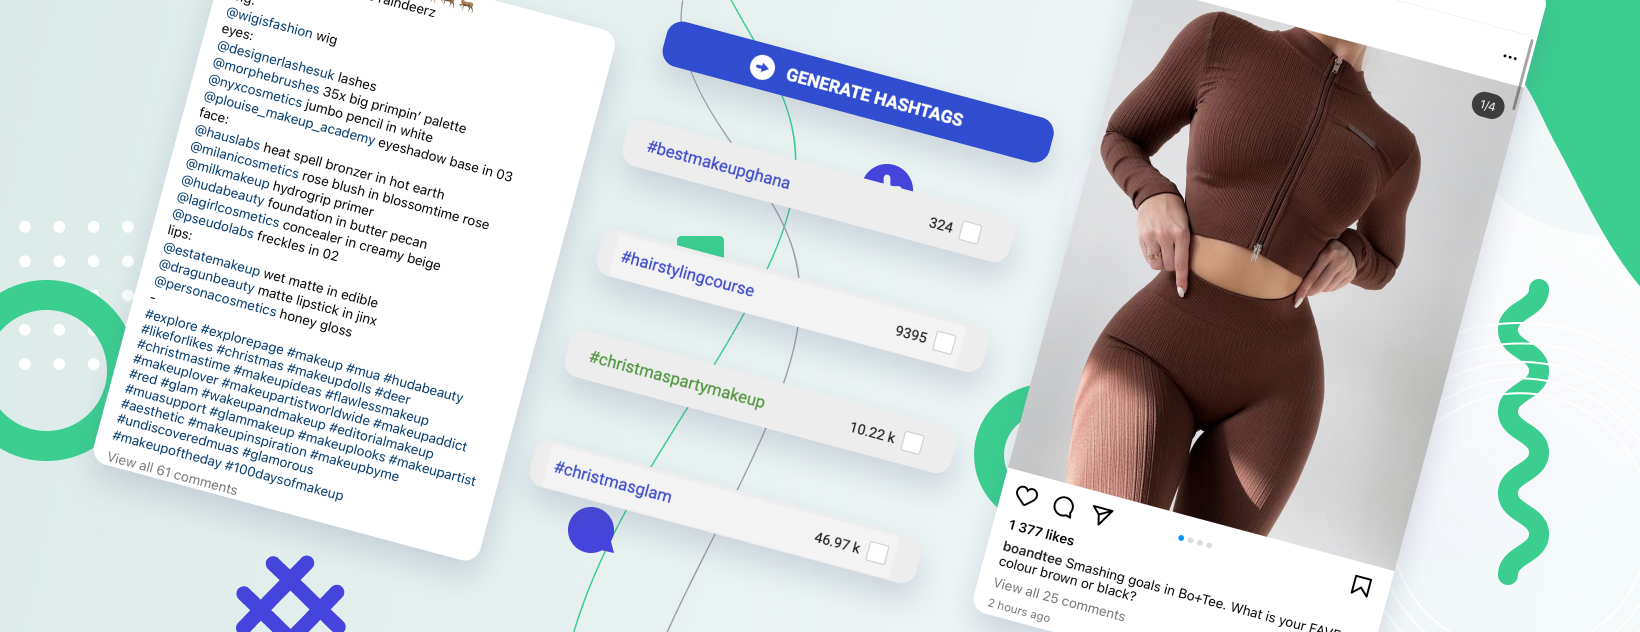 Instagram hashtag strategy for 2022 you haven't considered for growing your Instagram